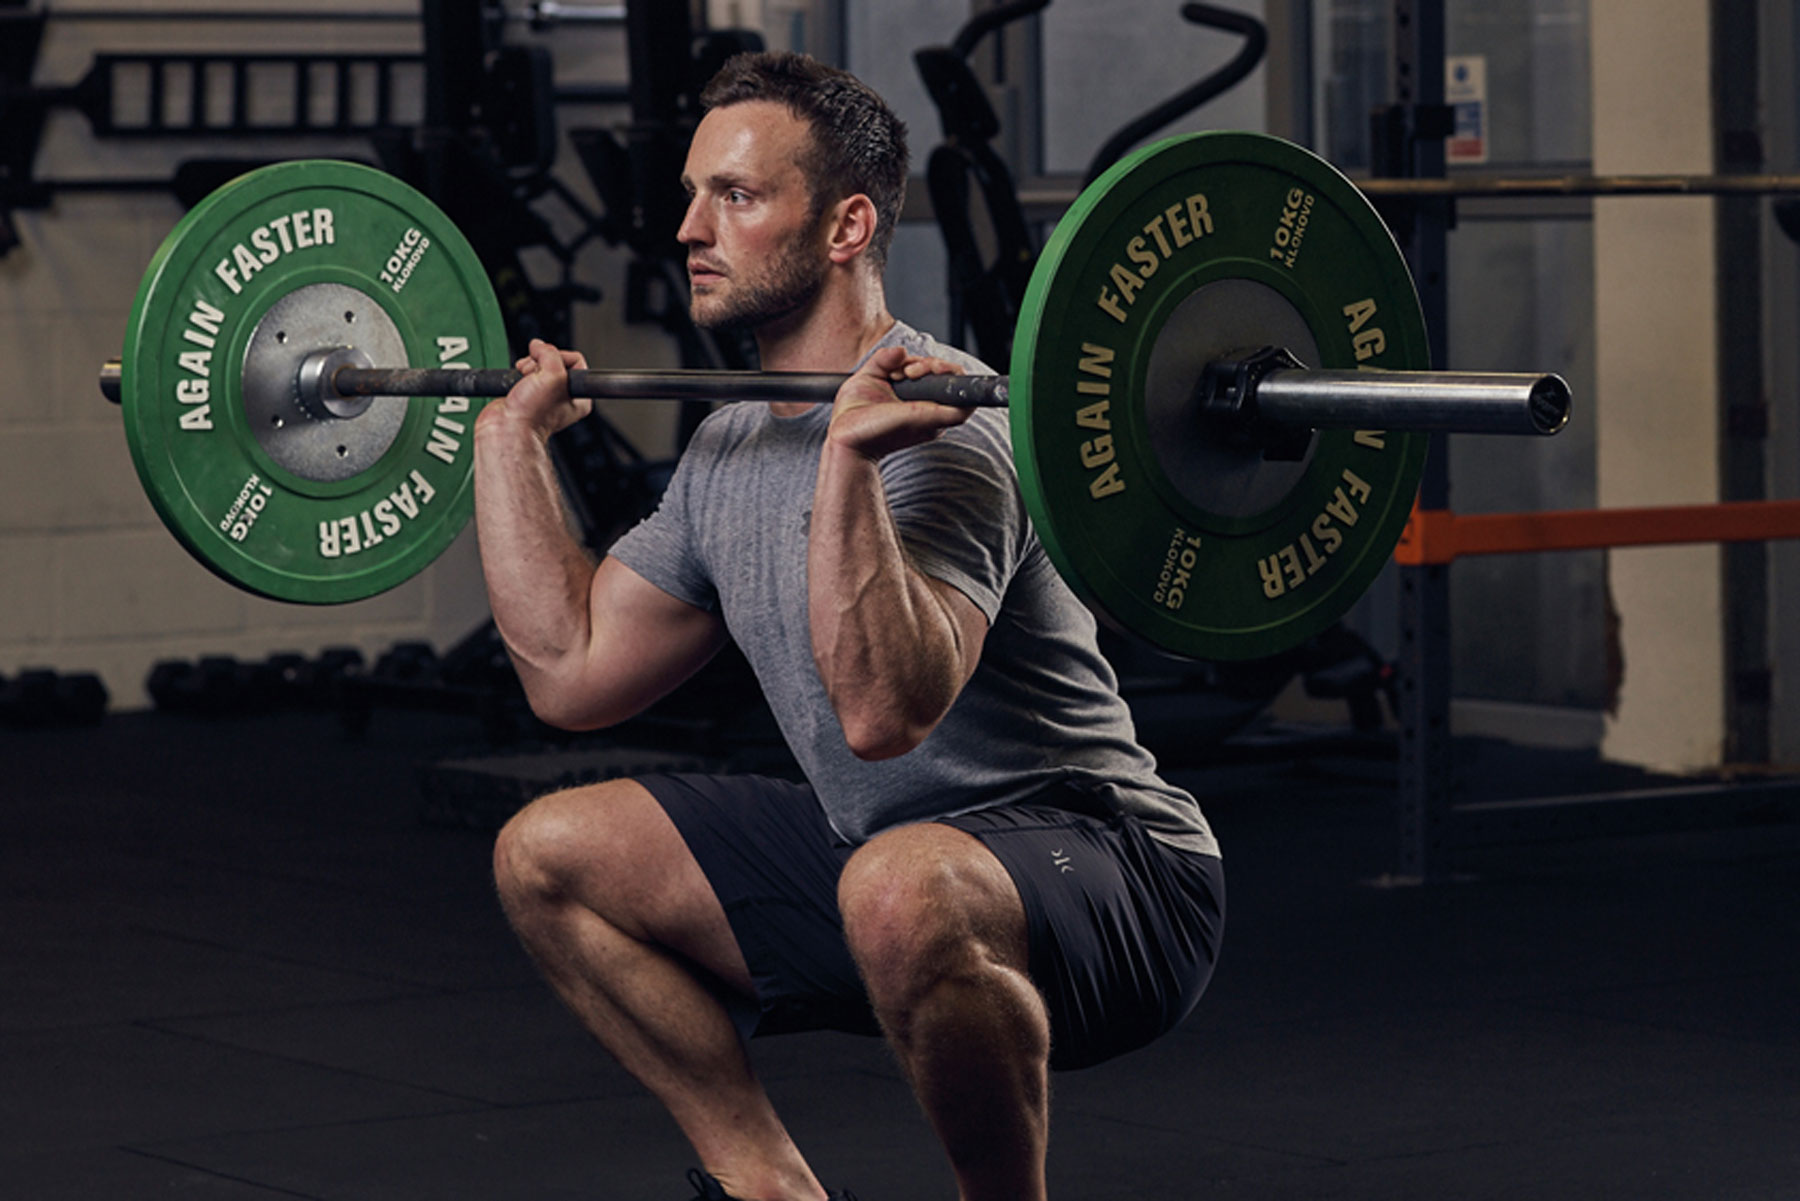 Try This Brutal 6-Move Leg-Day & Cardio Workout